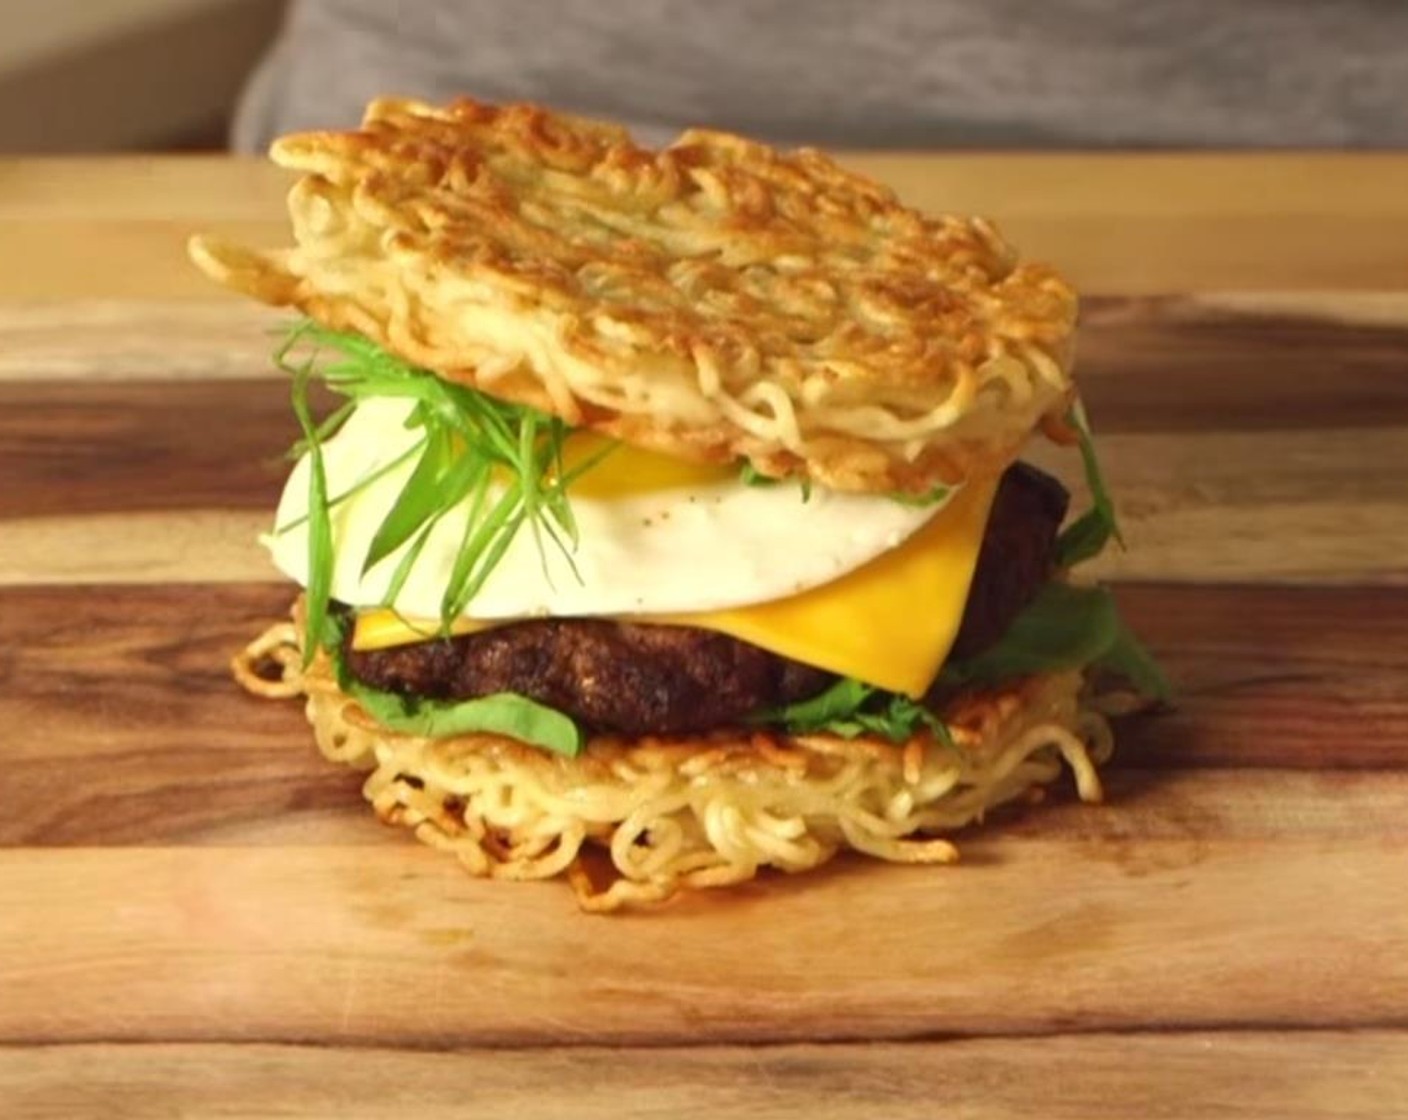 step 9 Assemble the burger in this order, ramen bun, Arugula (1/2 cup), sriracha-ketchup, burger patty, fried eggs, thinly sliced Scallion (1 bunch) and top with the other ramen bun. Wrap in wax paper for easier eating, and serve hot.